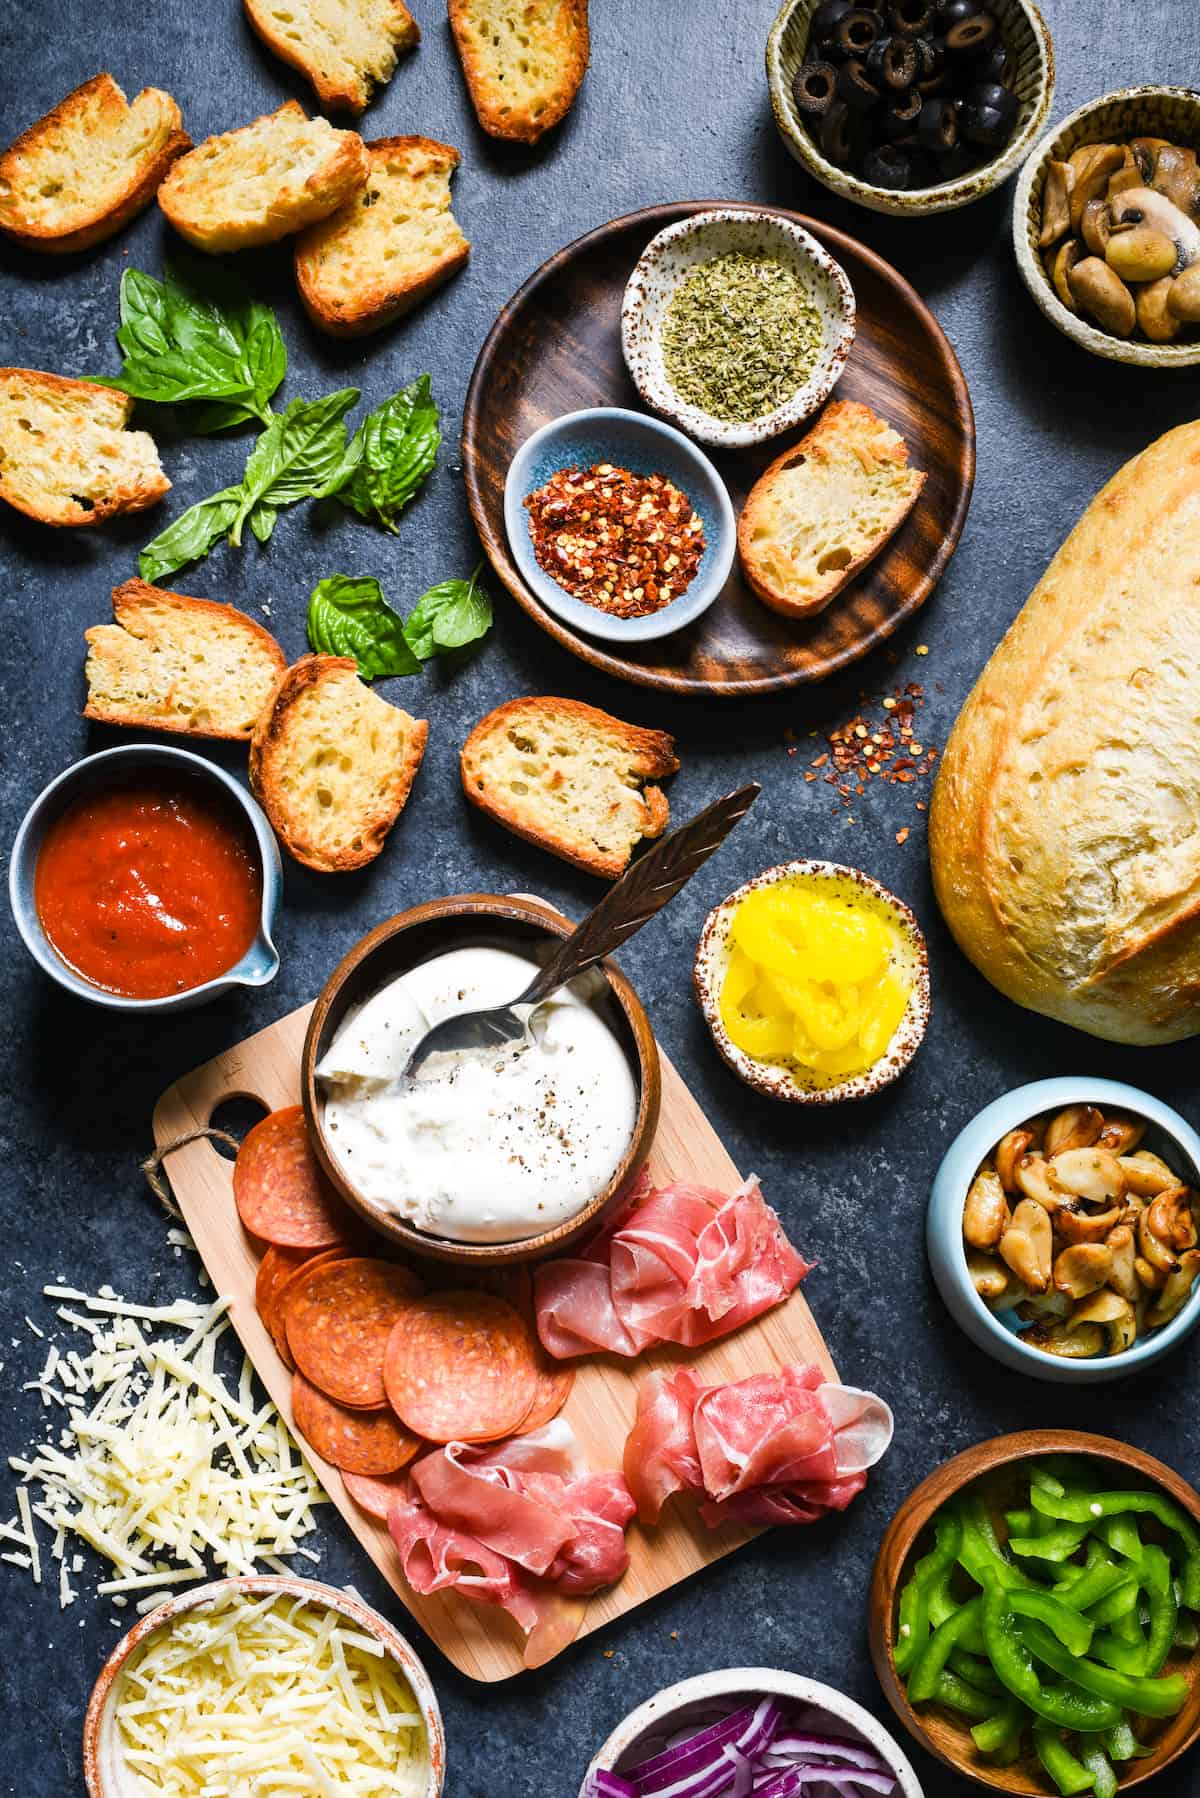 Pizza Crostini Bar - Put out some toasted bread and a big spread of pizza toppings, and let everybody make their own appetizer. So fun for parties! | foxeslovelemons.com